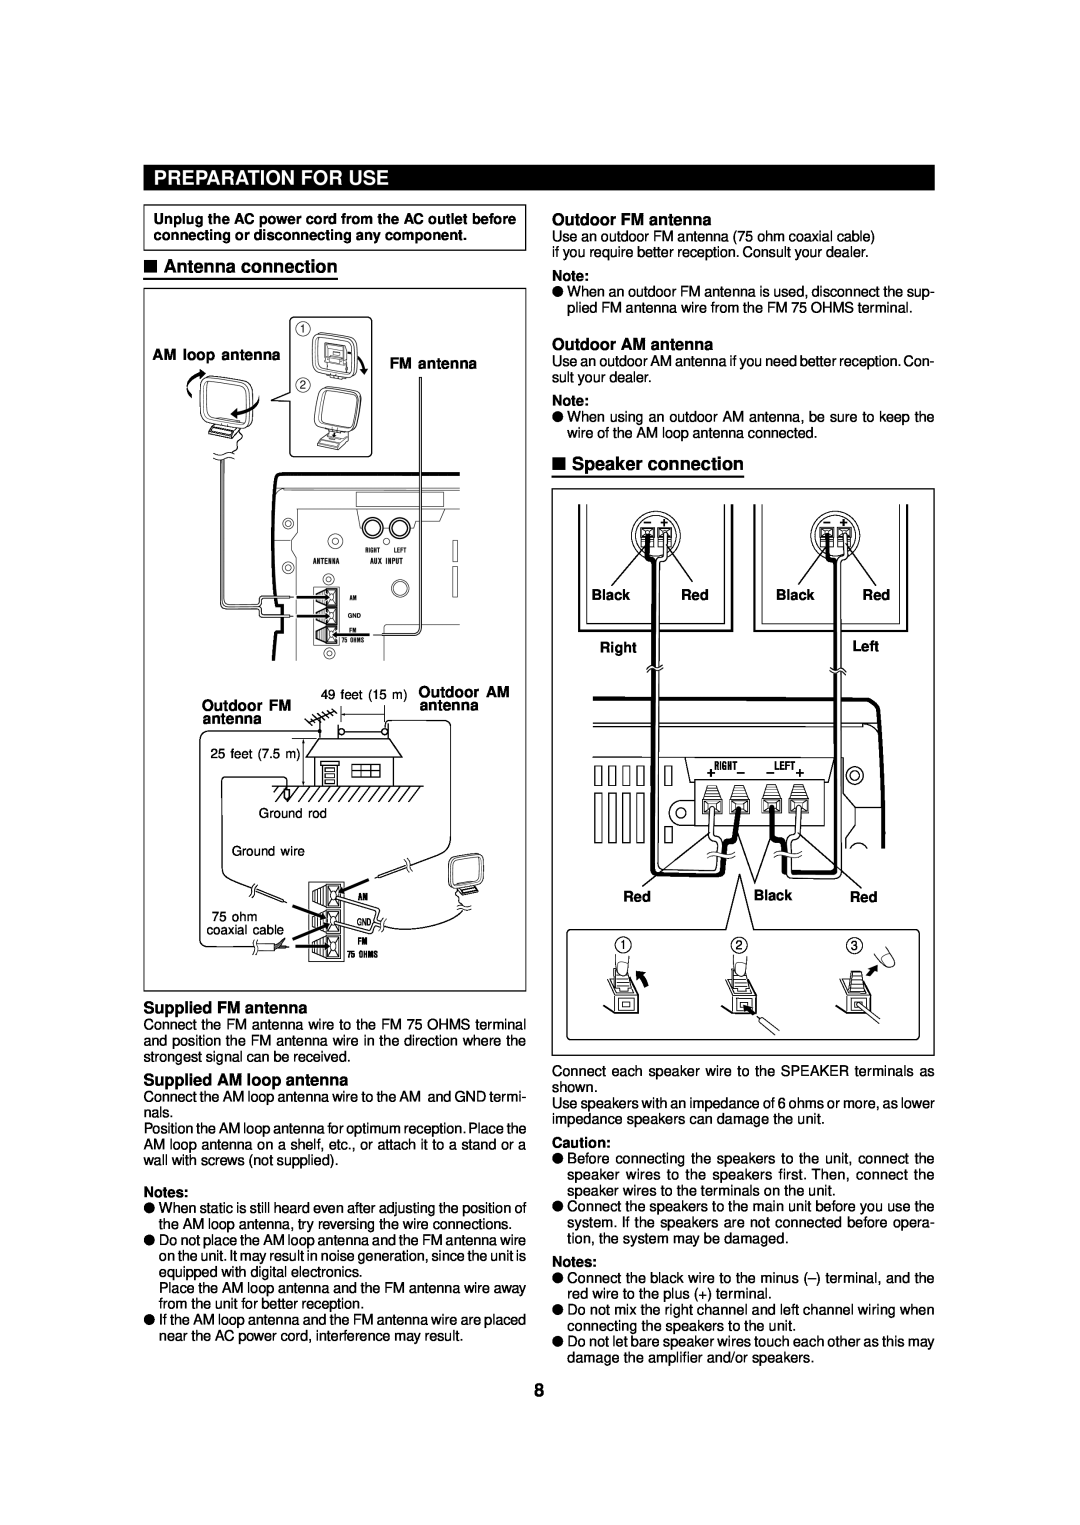 Sharp MD-MX20 operation manual Preparation For Use, Antenna connection, Speaker connection 